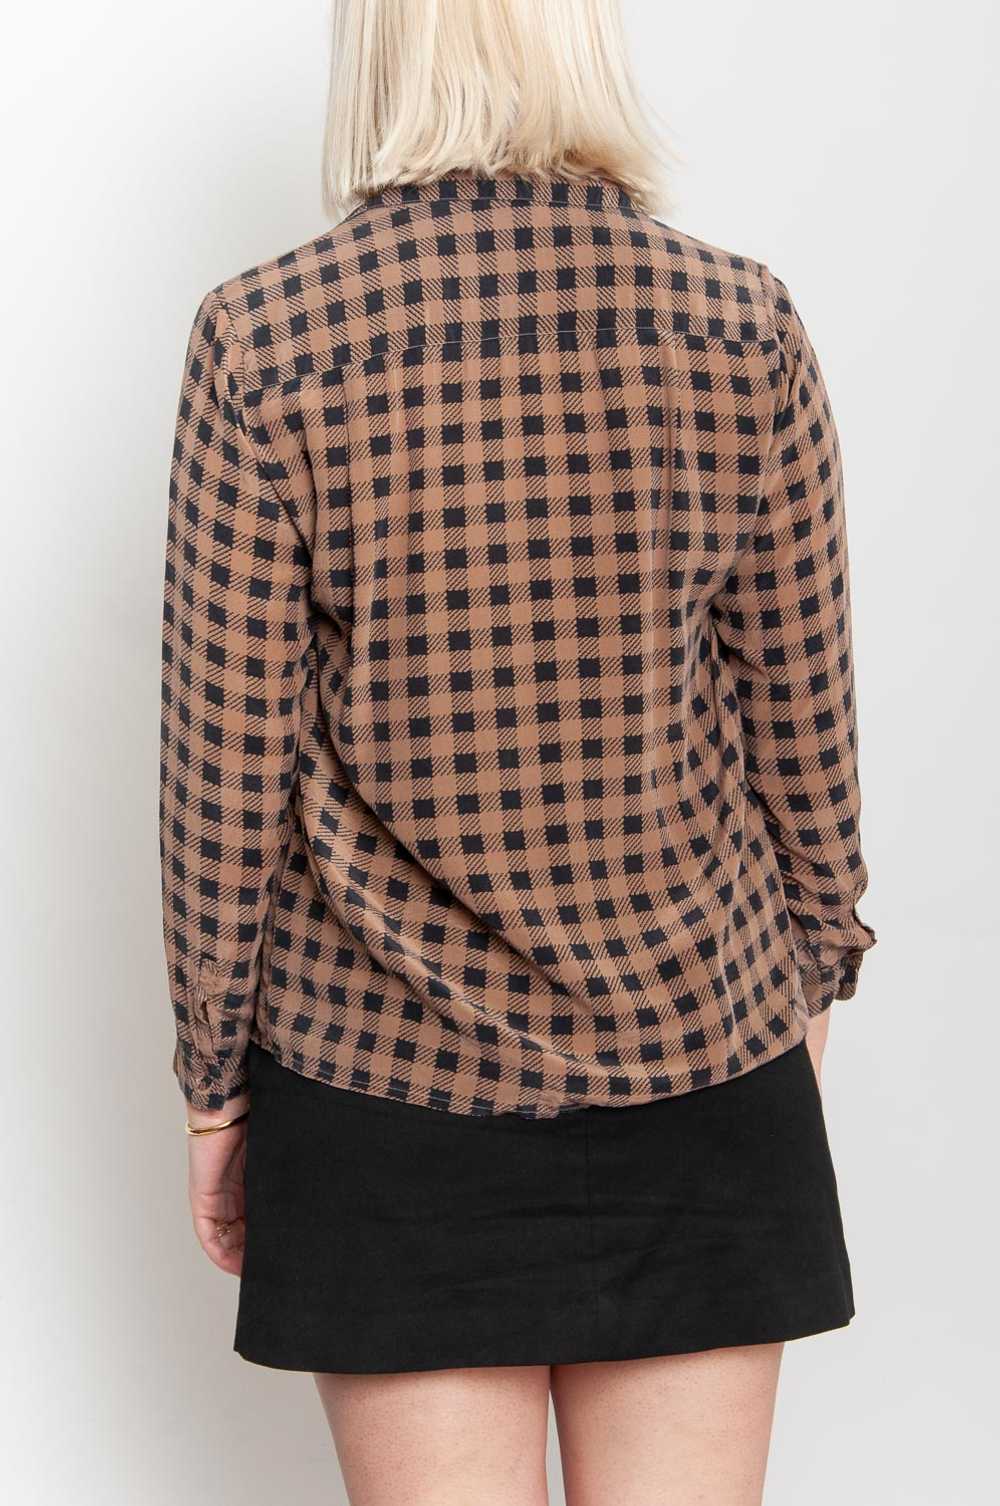 Checked silk blouse long sleeve Brown-Black - image 2